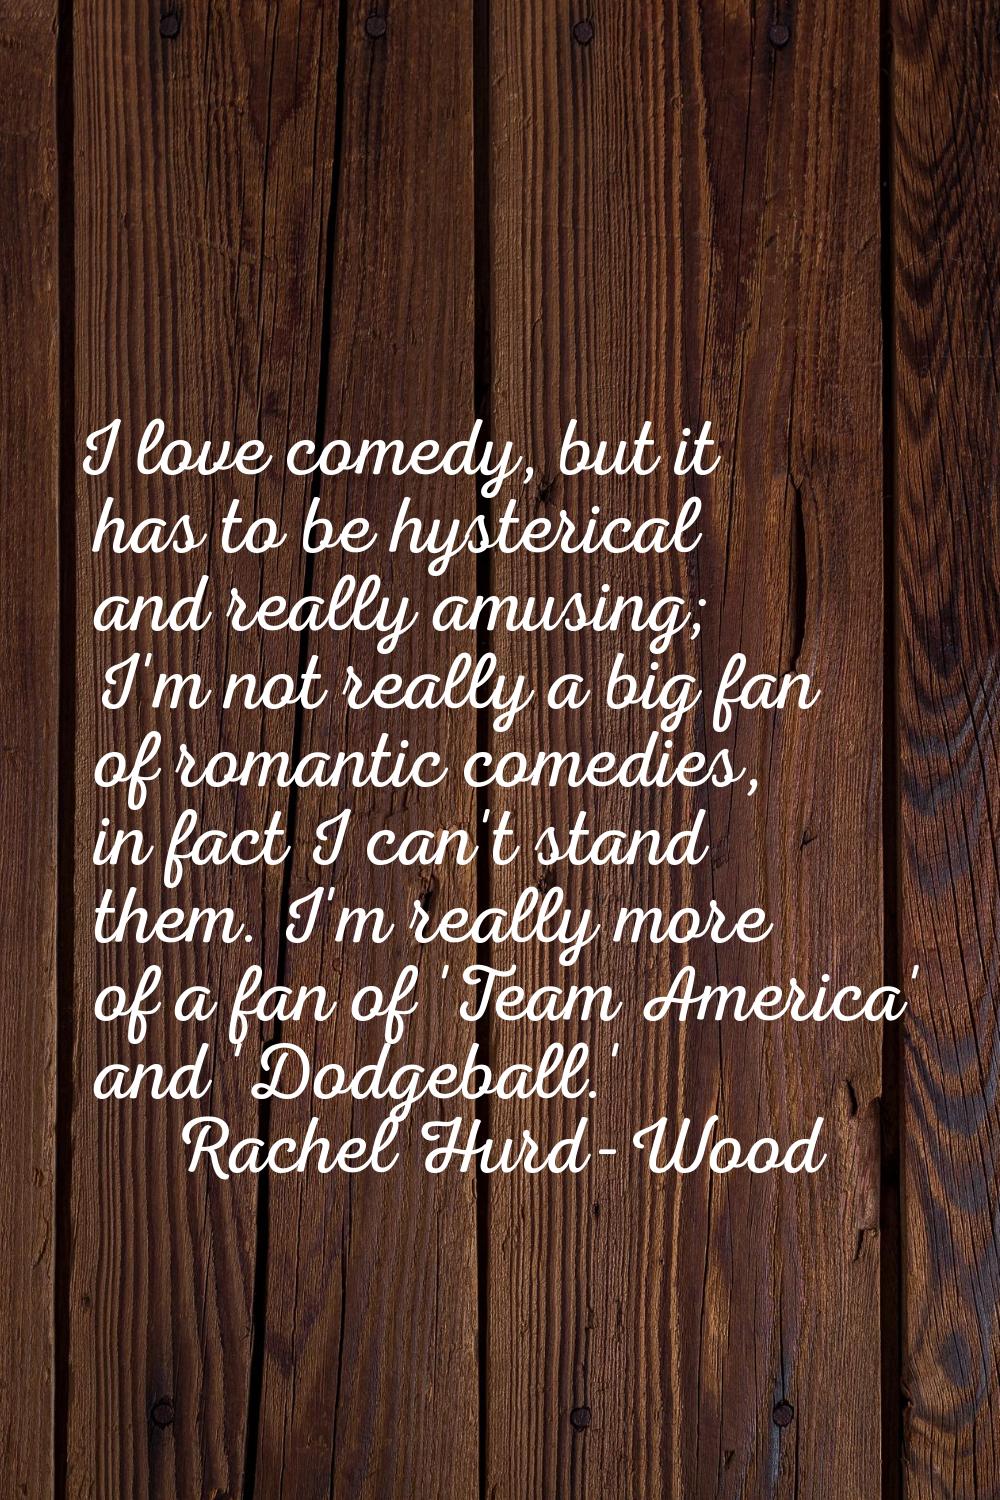 I love comedy, but it has to be hysterical and really amusing; I'm not really a big fan of romantic